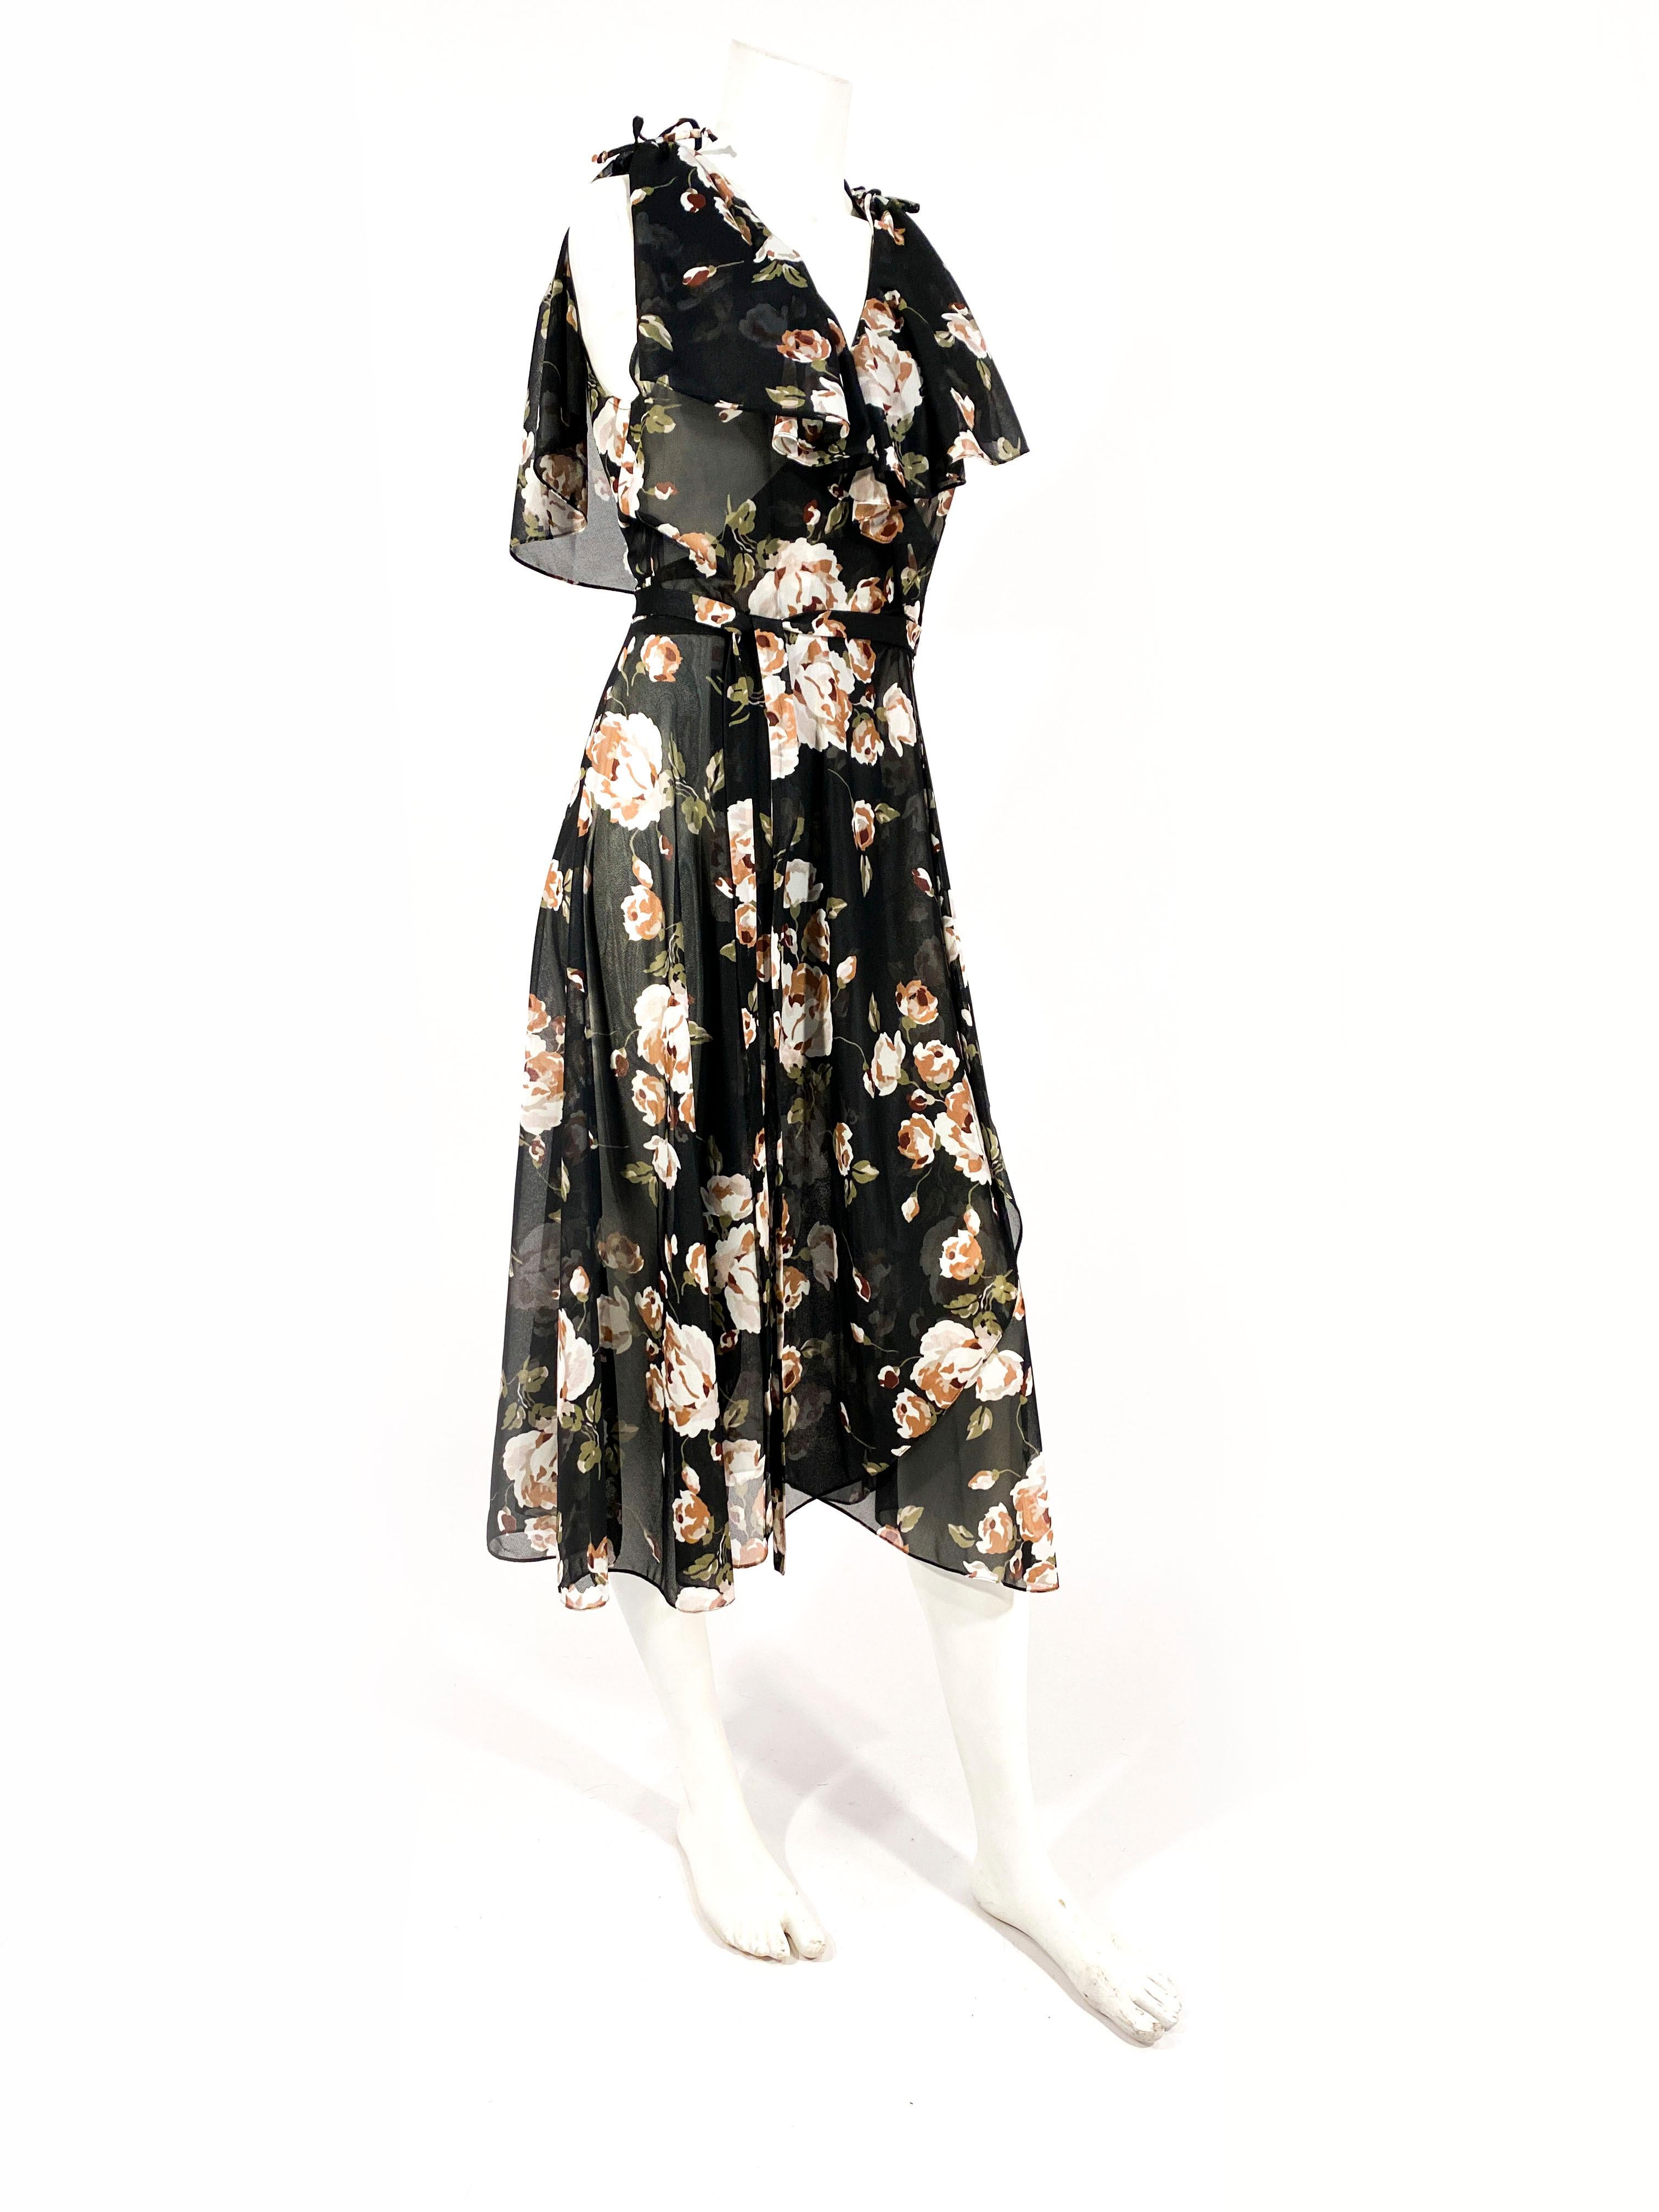 Women's 1970s Black and Floral Printed Wrap Dress For Sale